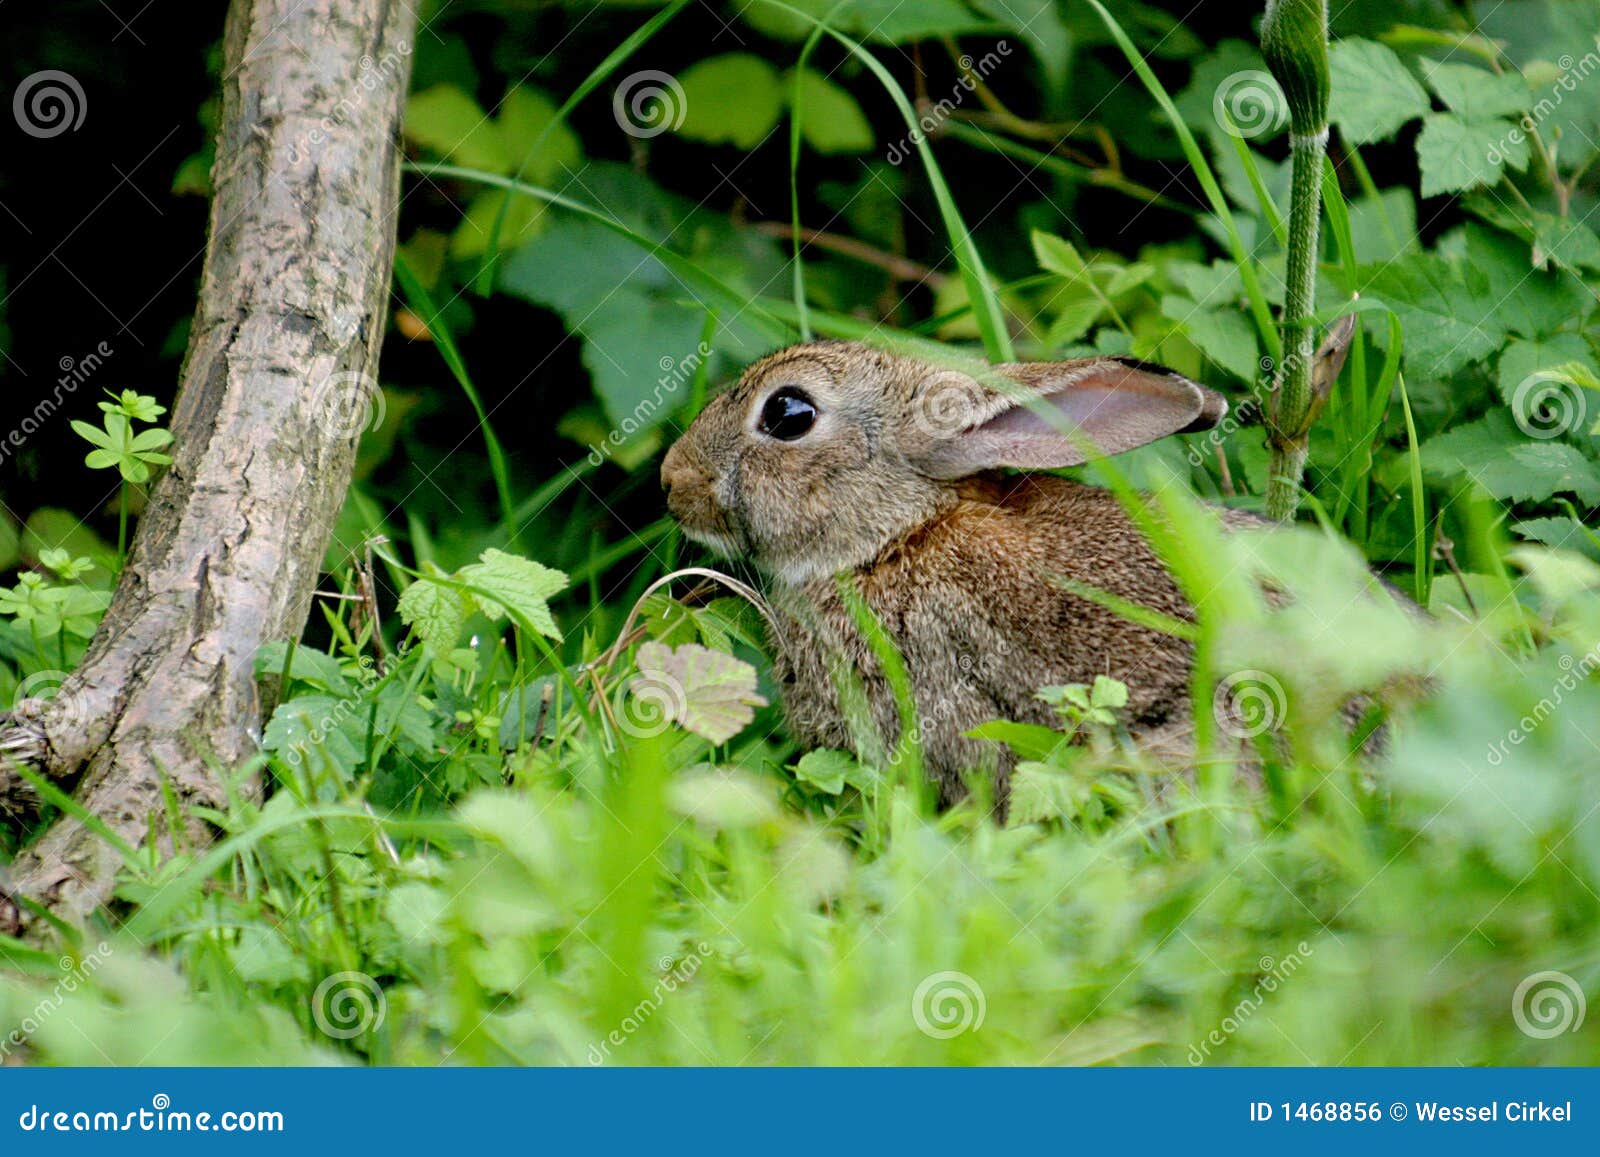 a young hare in wood